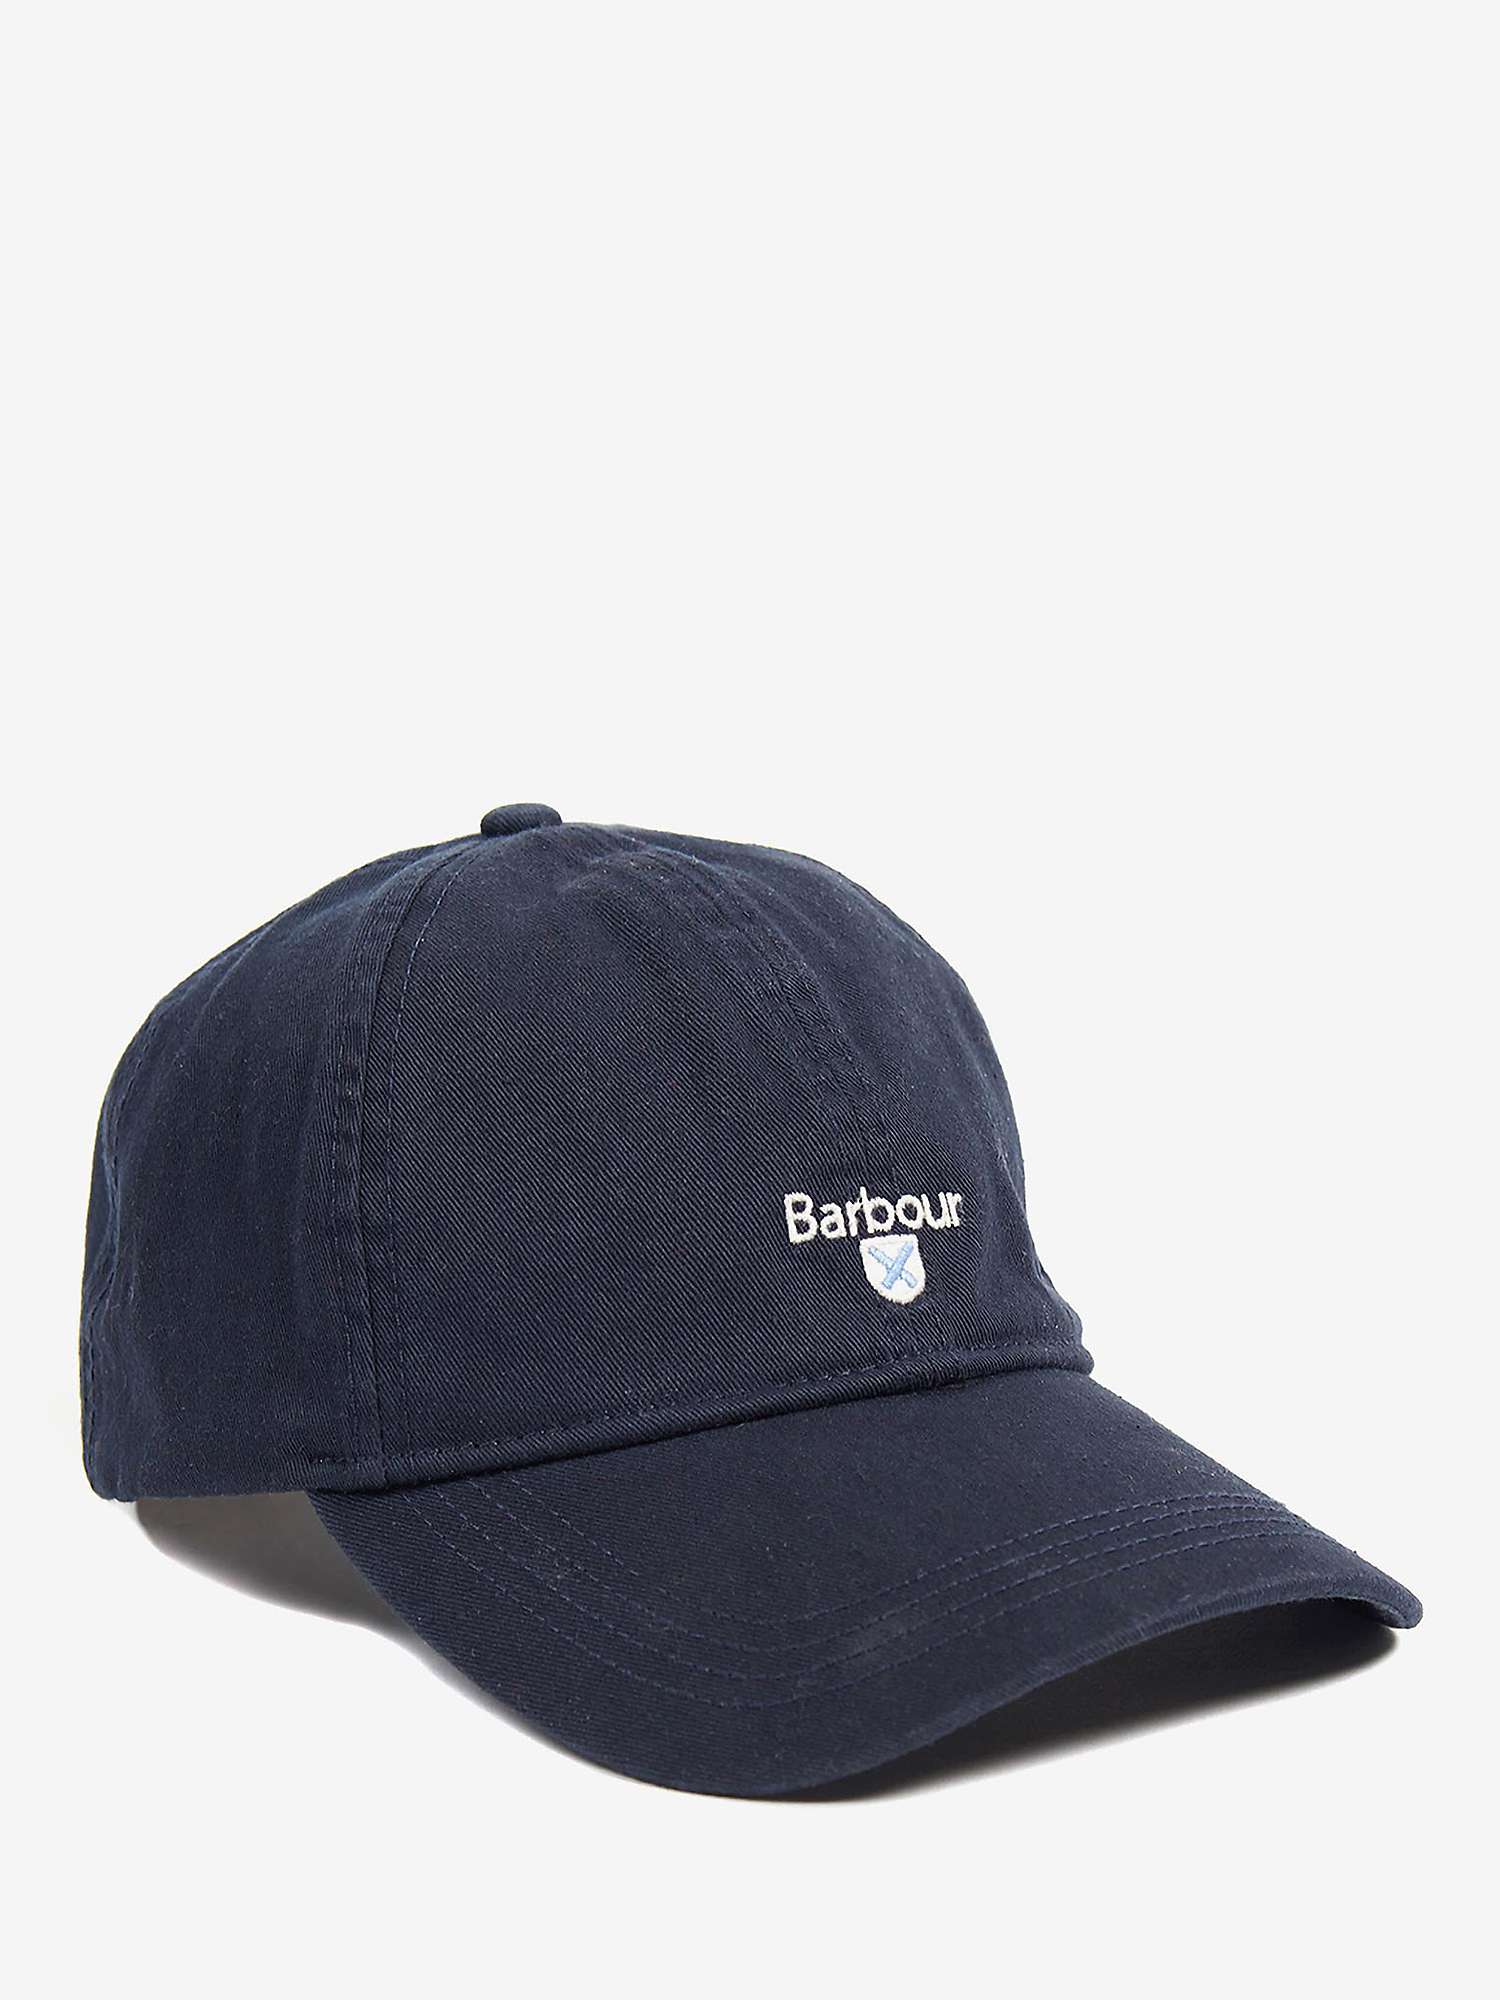 Buy Barbour Cascade Sports Baseball Cap, One Size Online at johnlewis.com